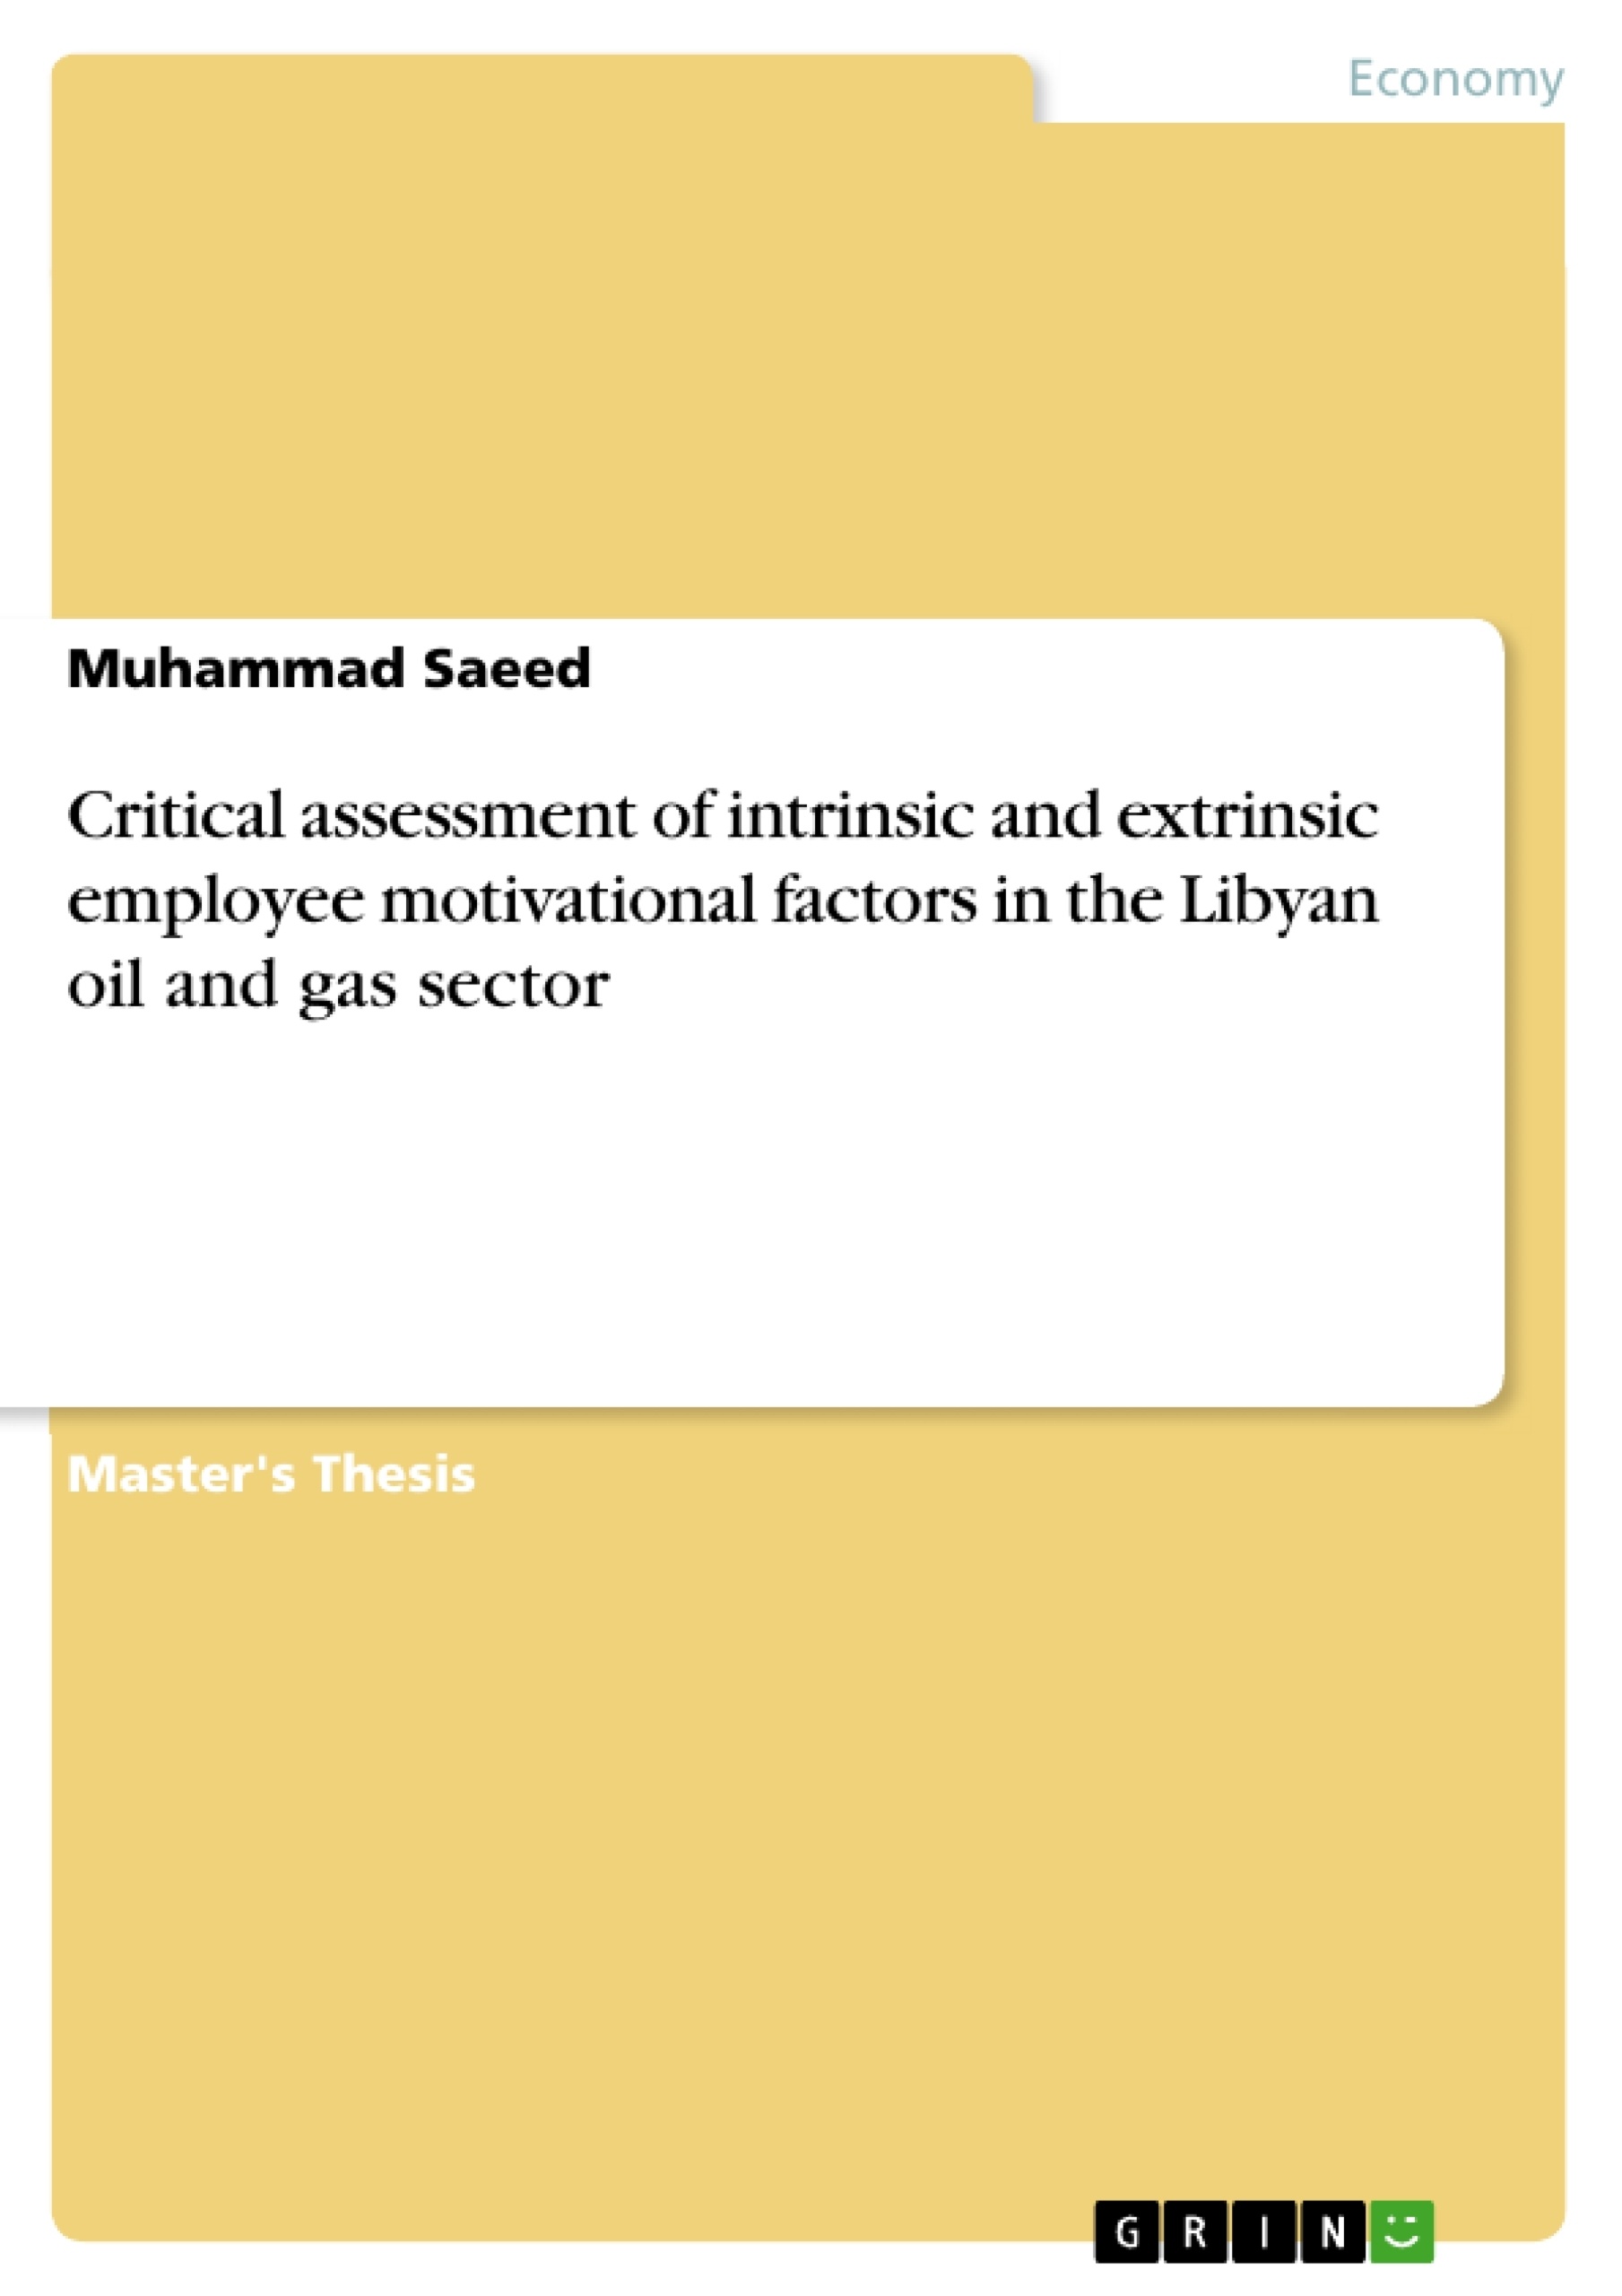 Titre: Critical assessment of intrinsic and extrinsic employee motivational factors in the Libyan oil and gas sector